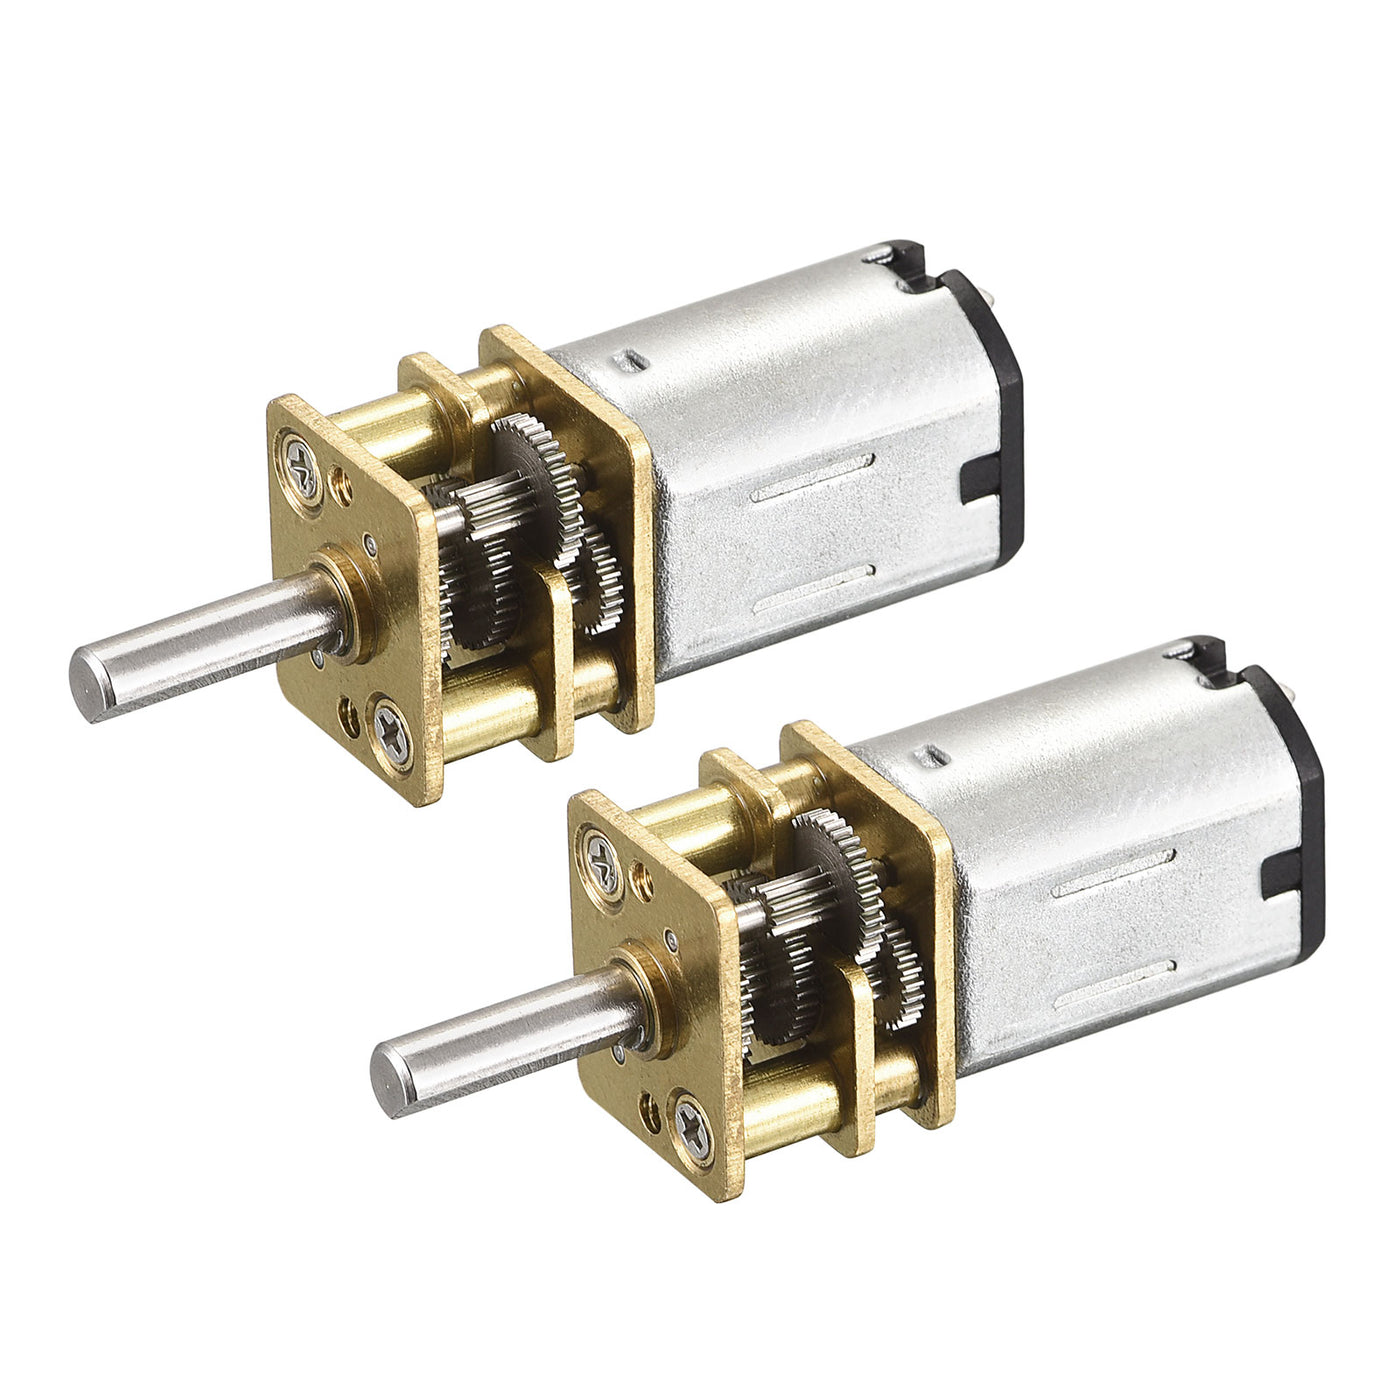 Harfington Micro Speed Reduction Gear Motor,DC 12V 100RPM with Full Metal Gearbox Pack of 2